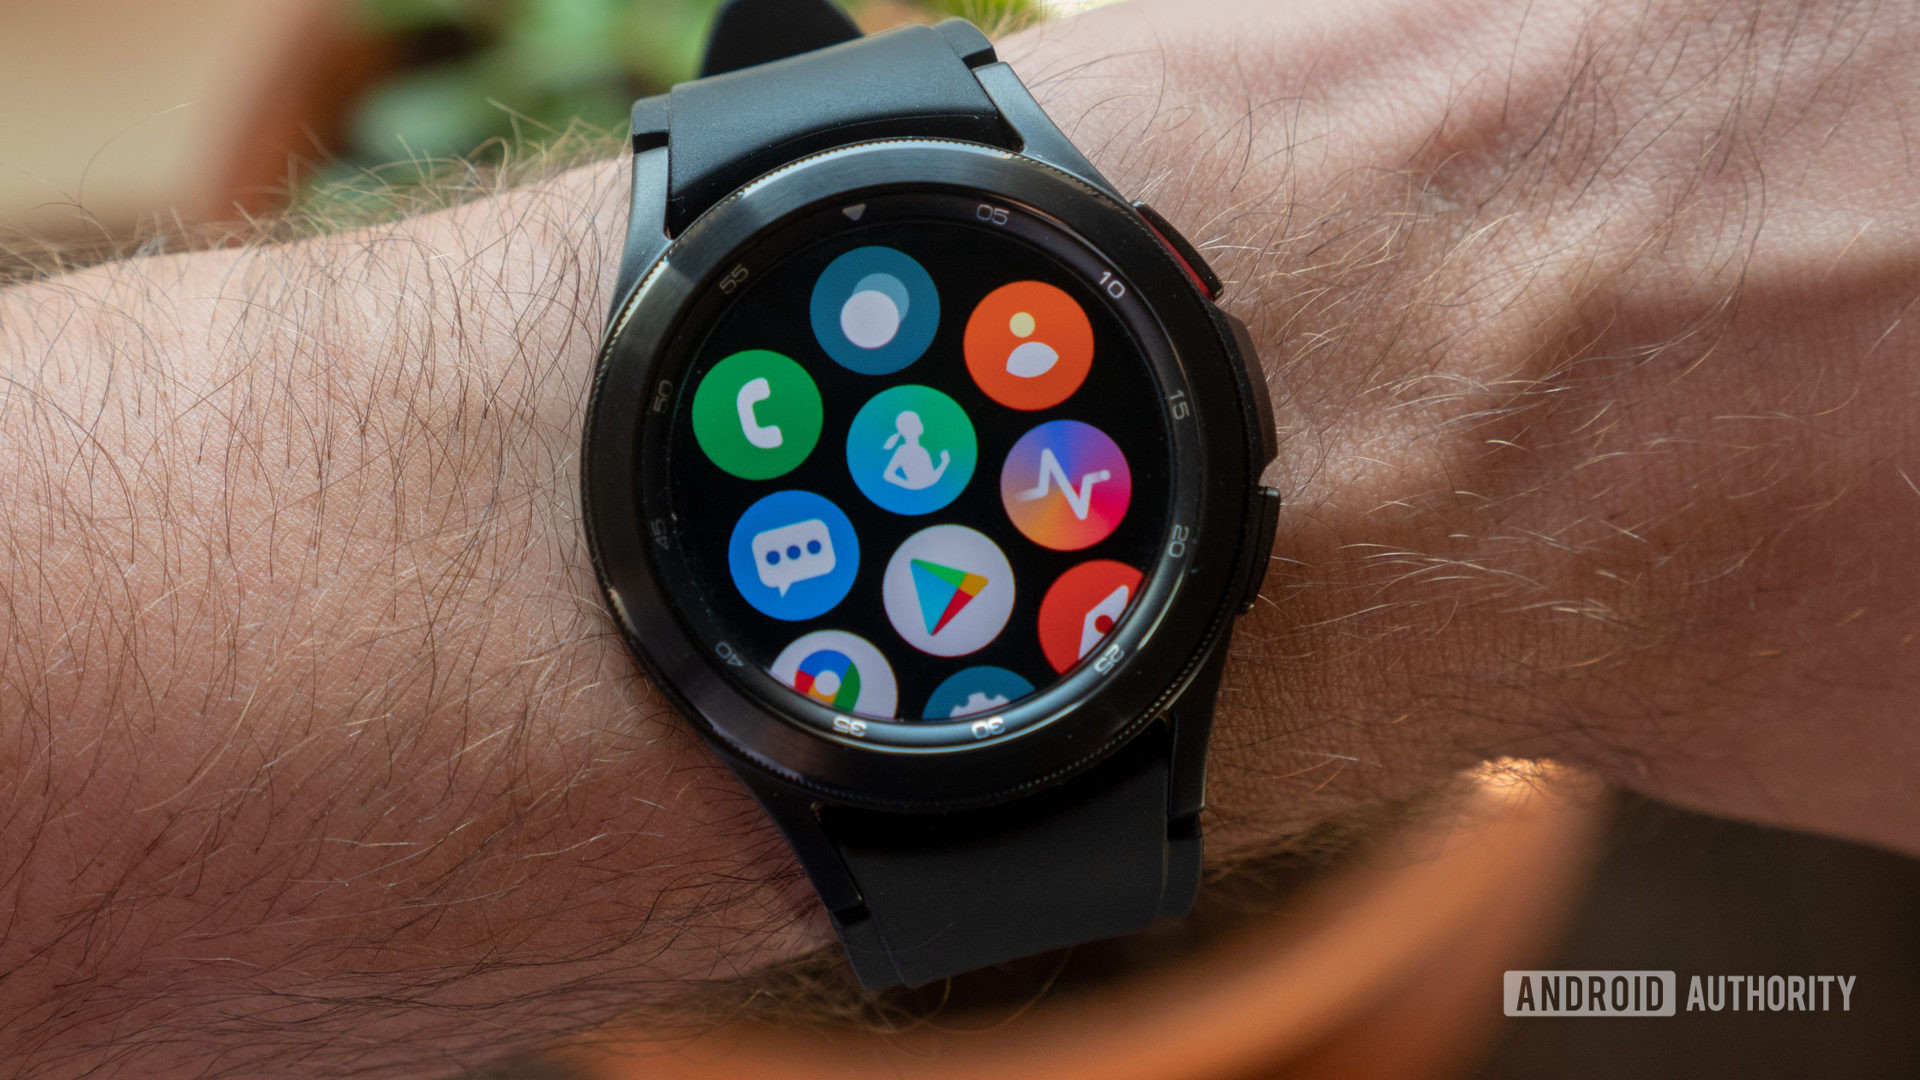 The Samsung Galaxy Watch 4 Classic on wrist showing the all apps screen.